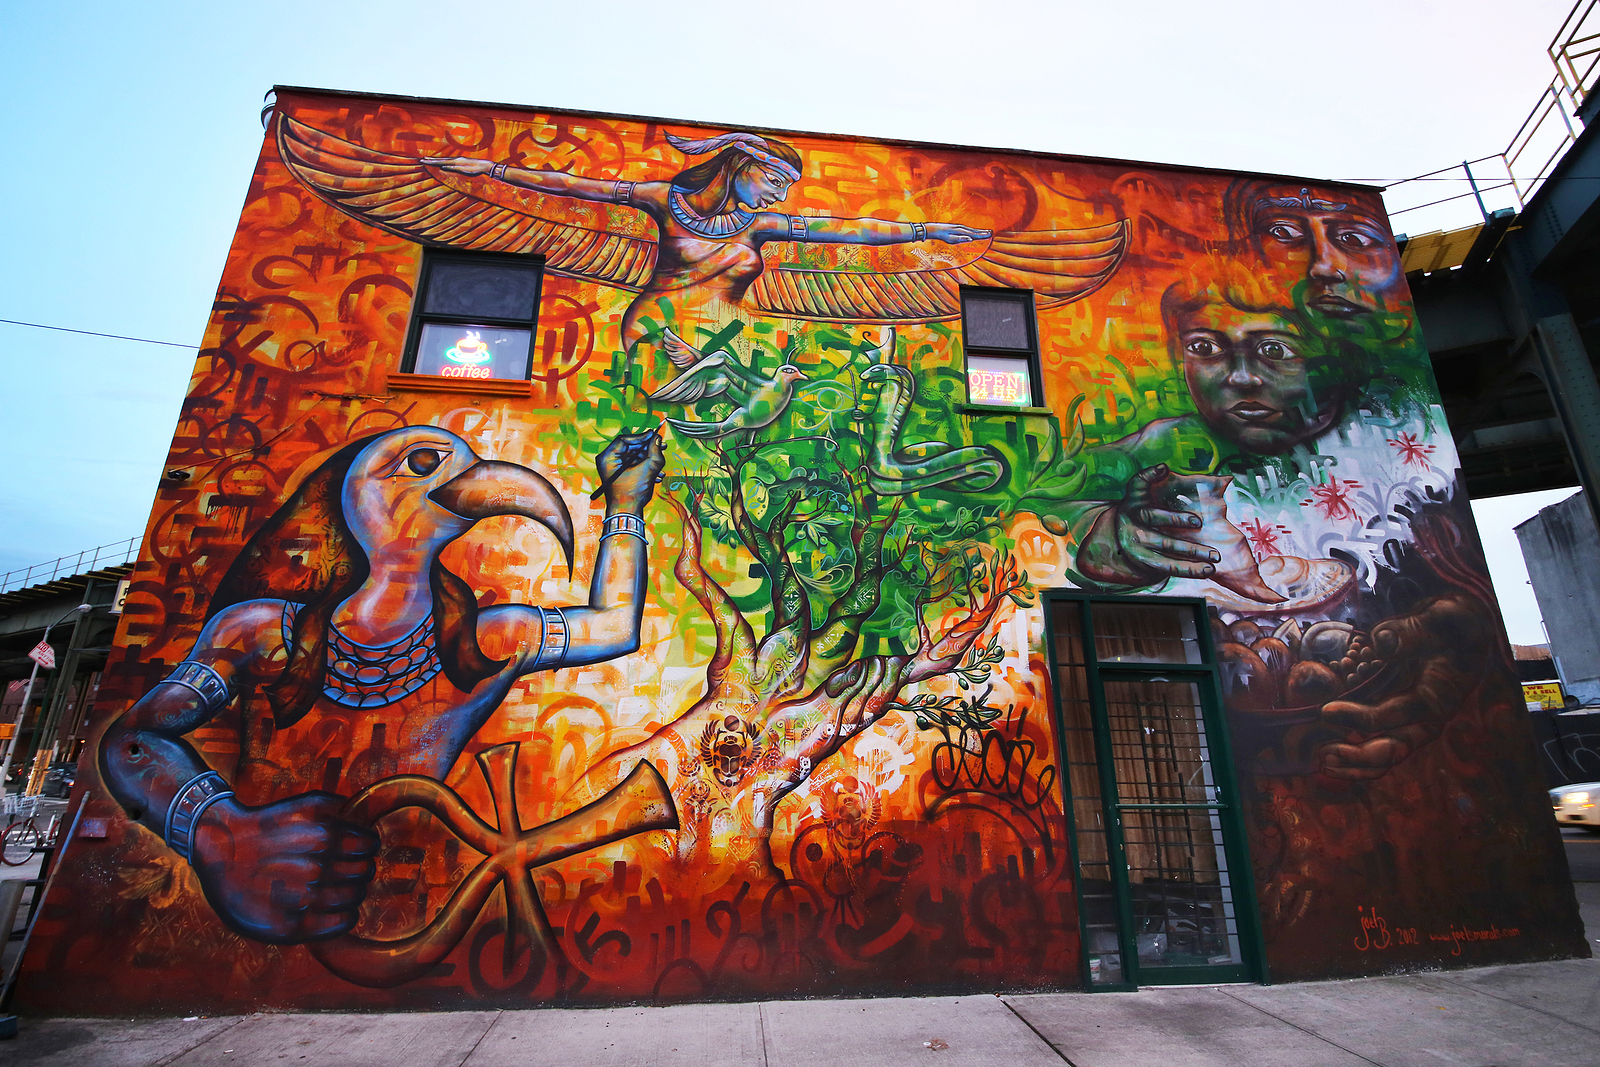 Five Places Where You Can Find Cool Graffiti Art in New York City